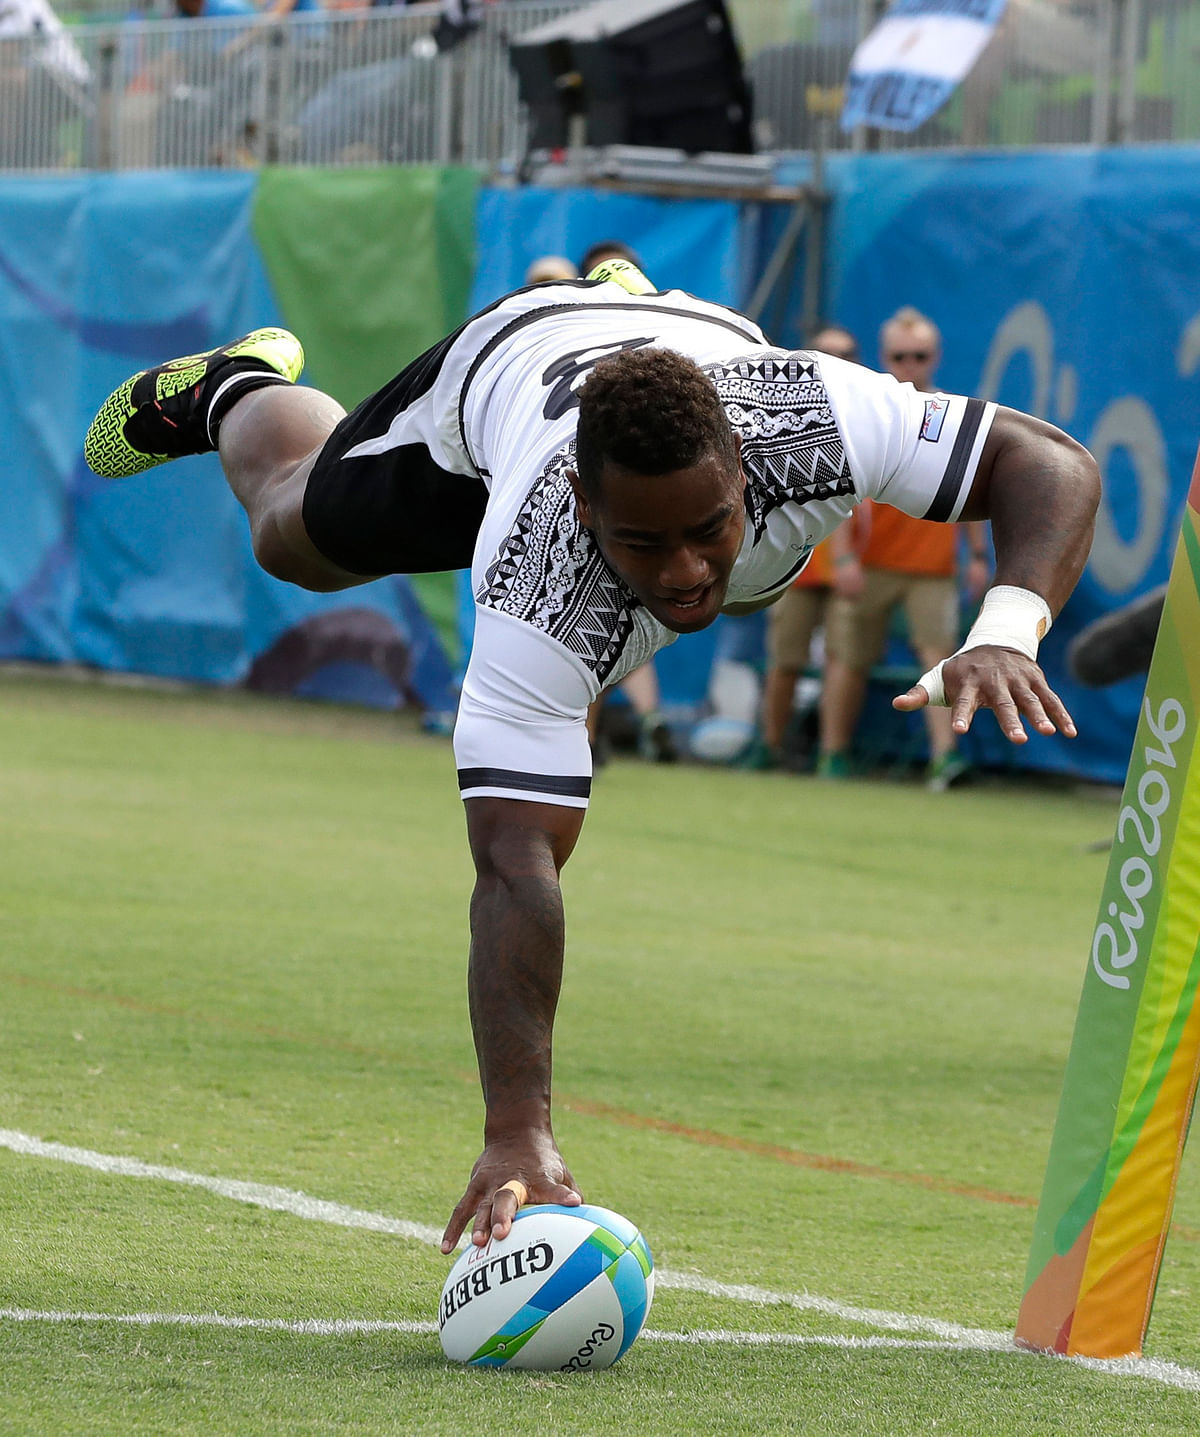 Jamaican sprinter Yohan Blake will be a major medal favorite for the country.